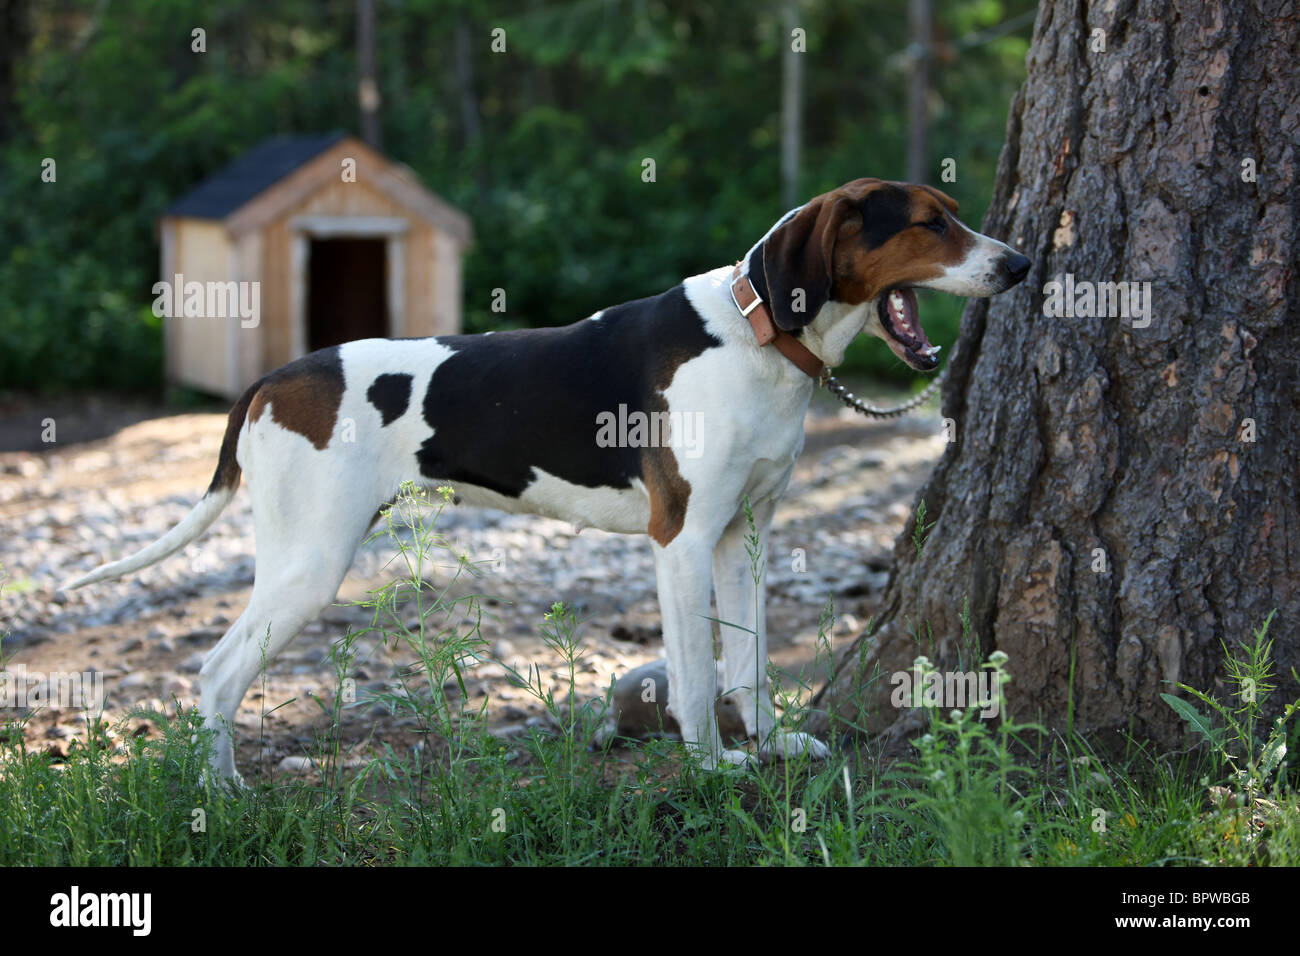 Hound dog used for hunting raccoons and bear tied with a chain to kennel. Dog yawning mouth open. Companion and work animal. Stock Photo